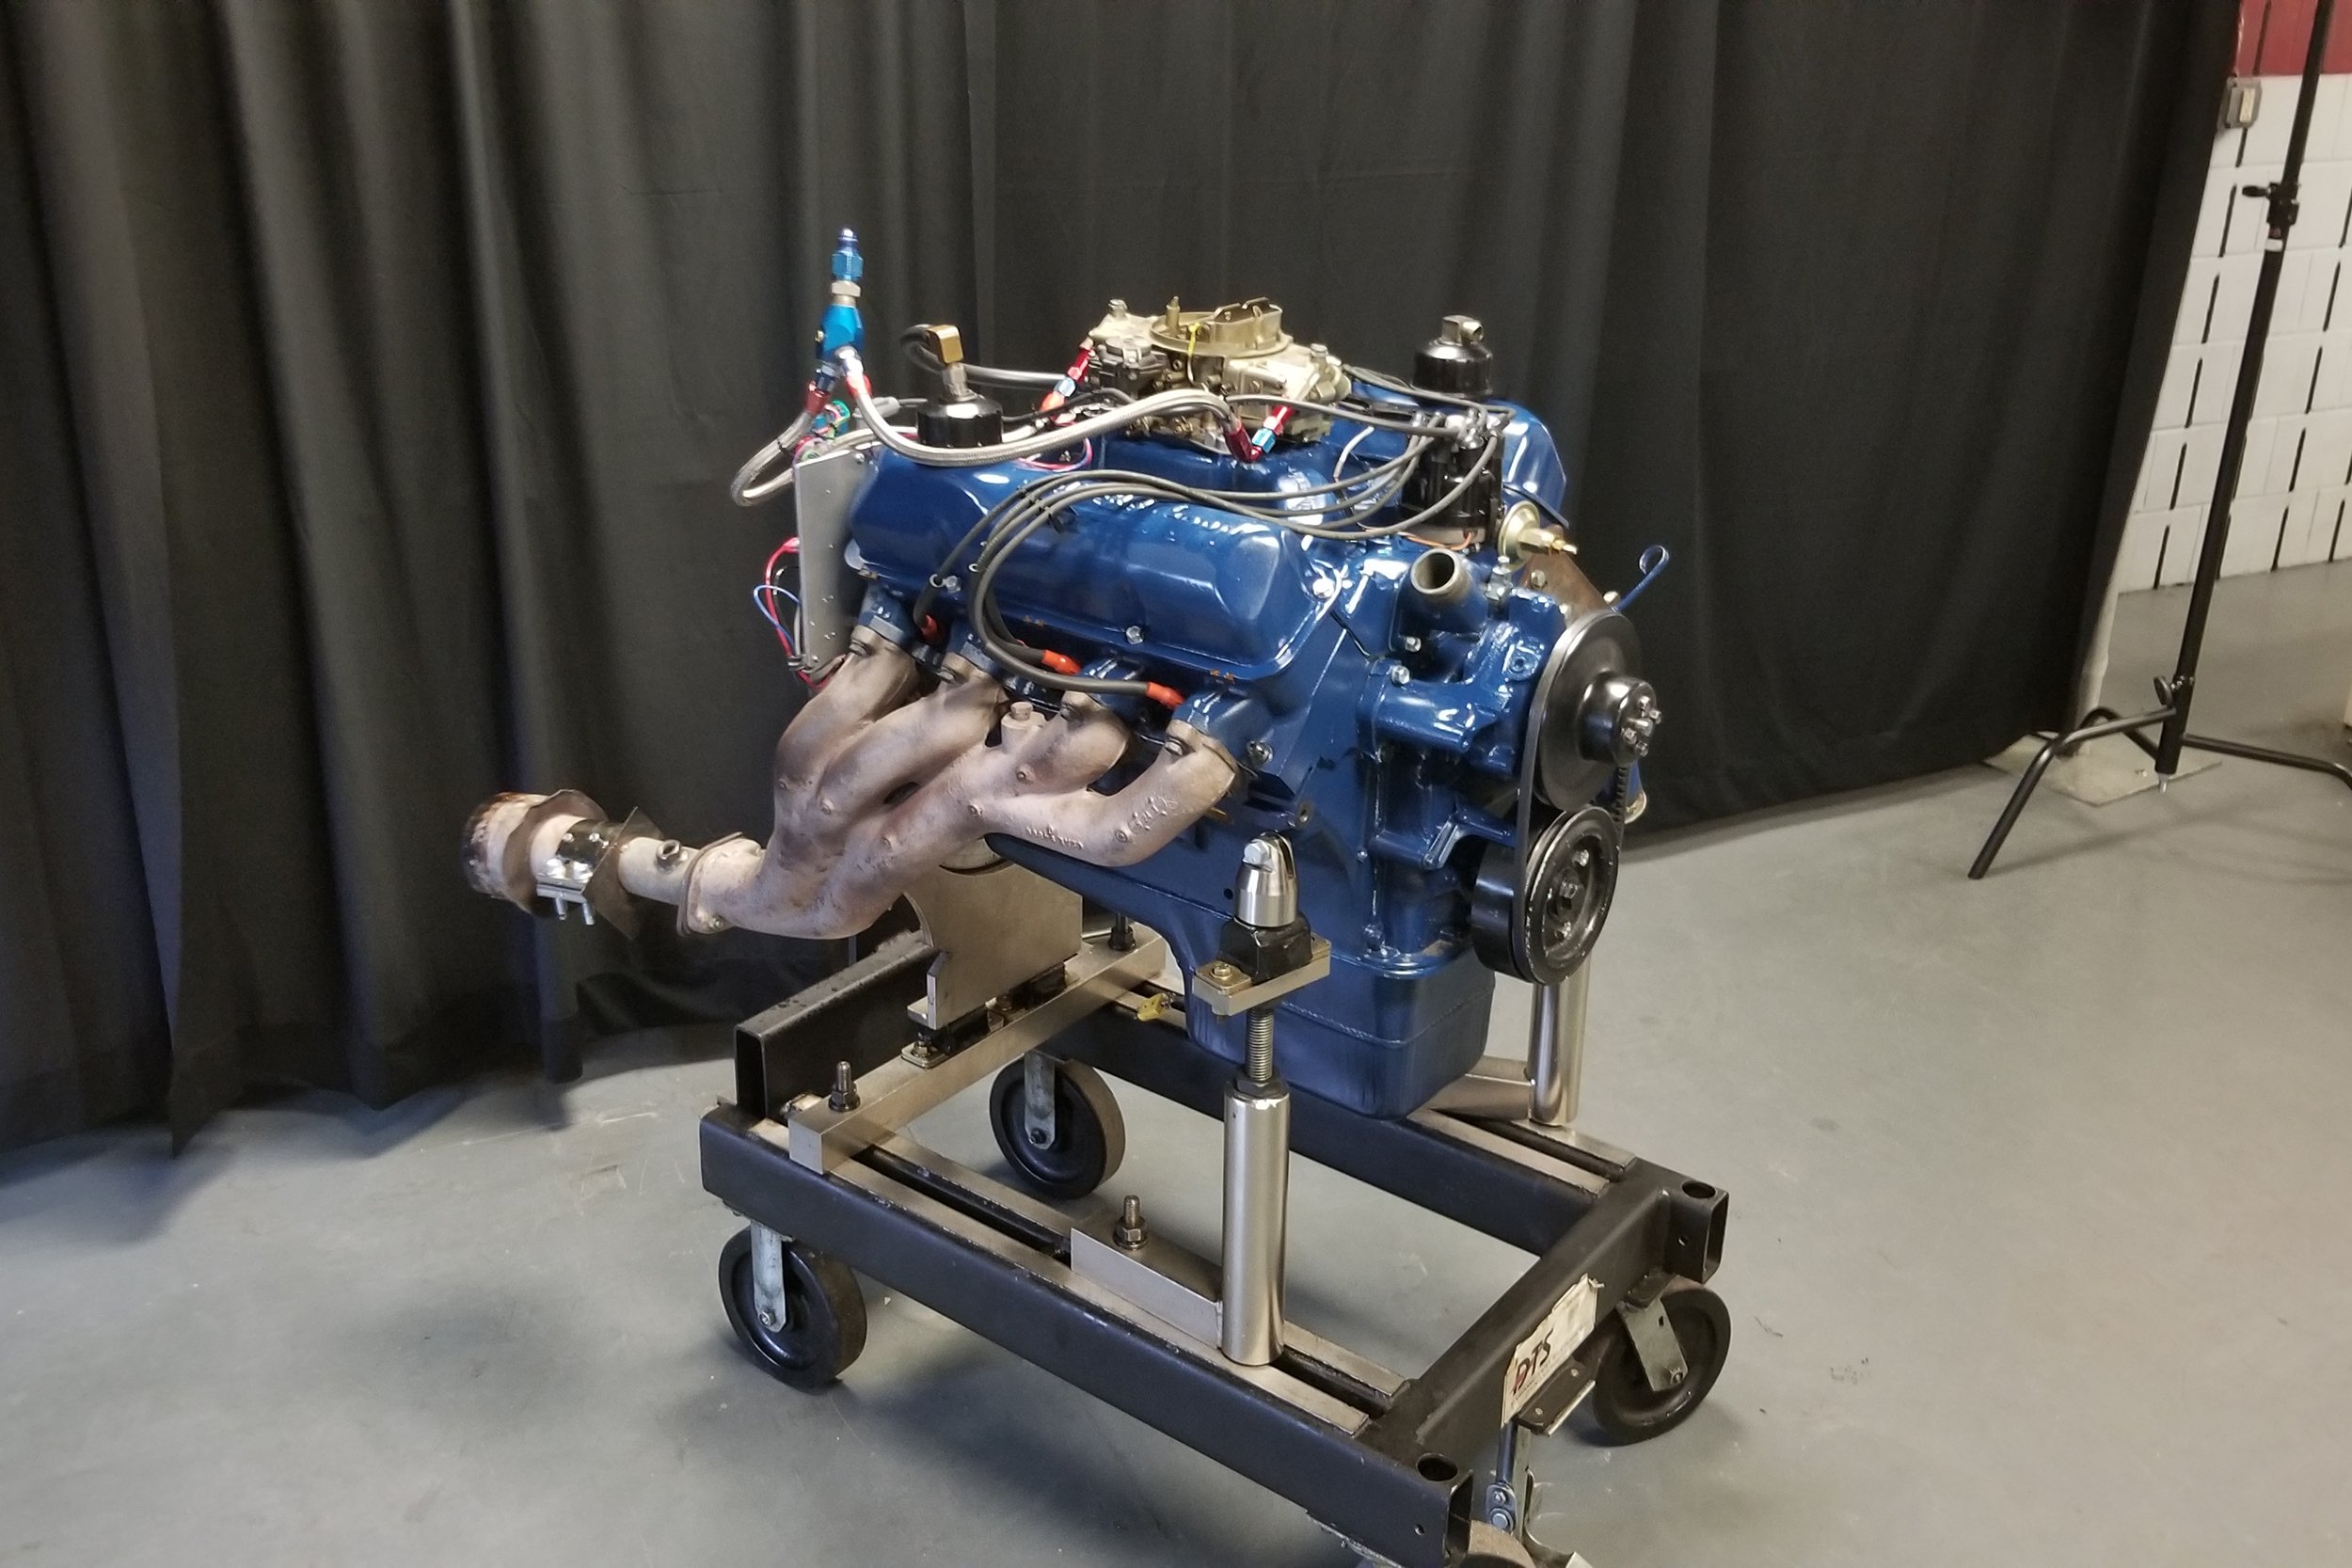 Video: Engine Masters FE Engine Looks Stock, Pumps Out Big Power.